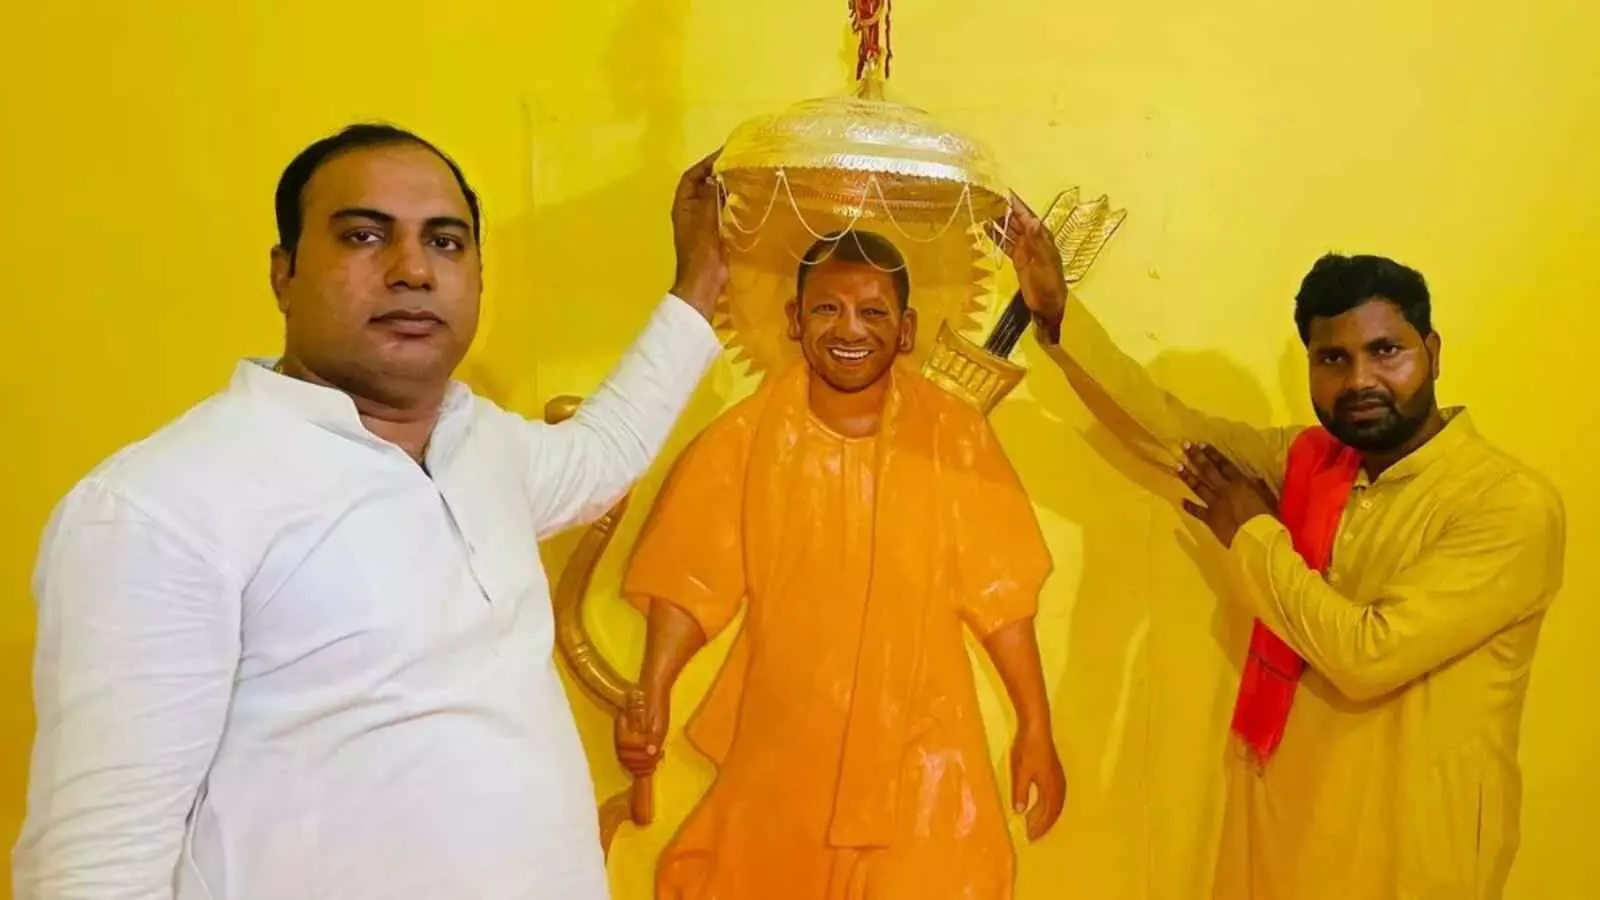 amit jani reached yogi temple in ayodhya offered silver umbrella amit jani political career